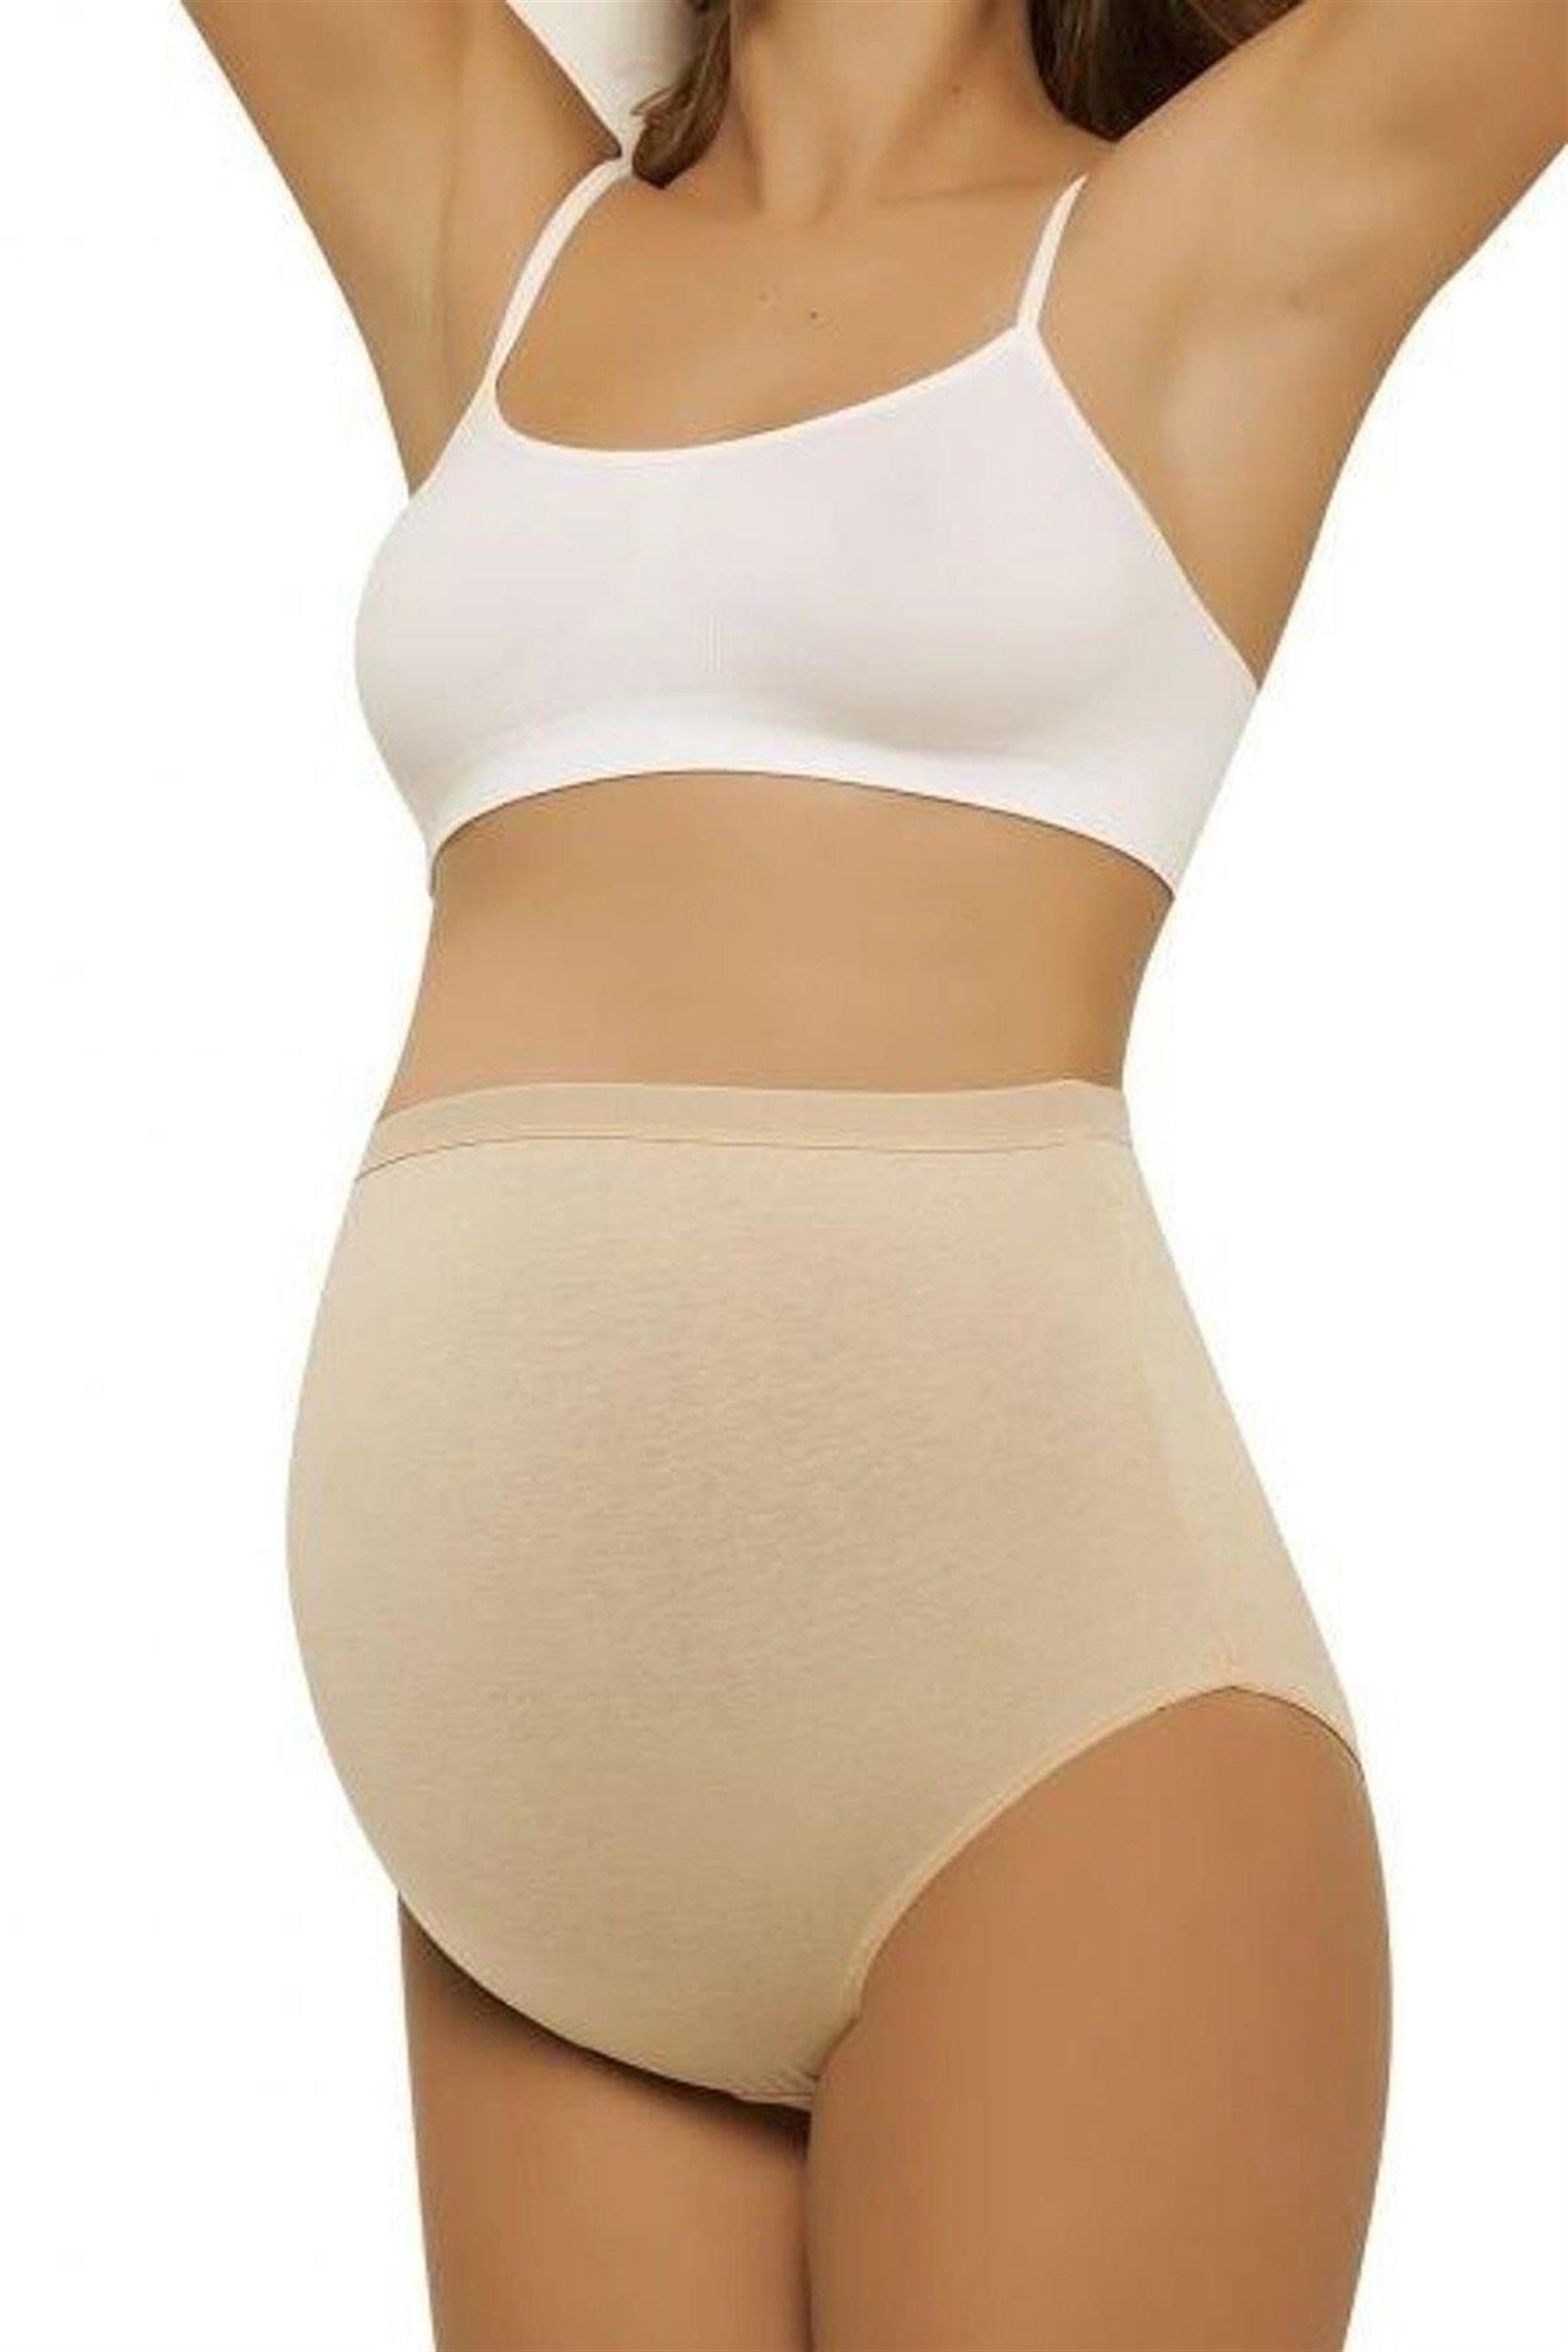 Shopymommy - 3-Pack Firming Slip Maternity Panties - 5210